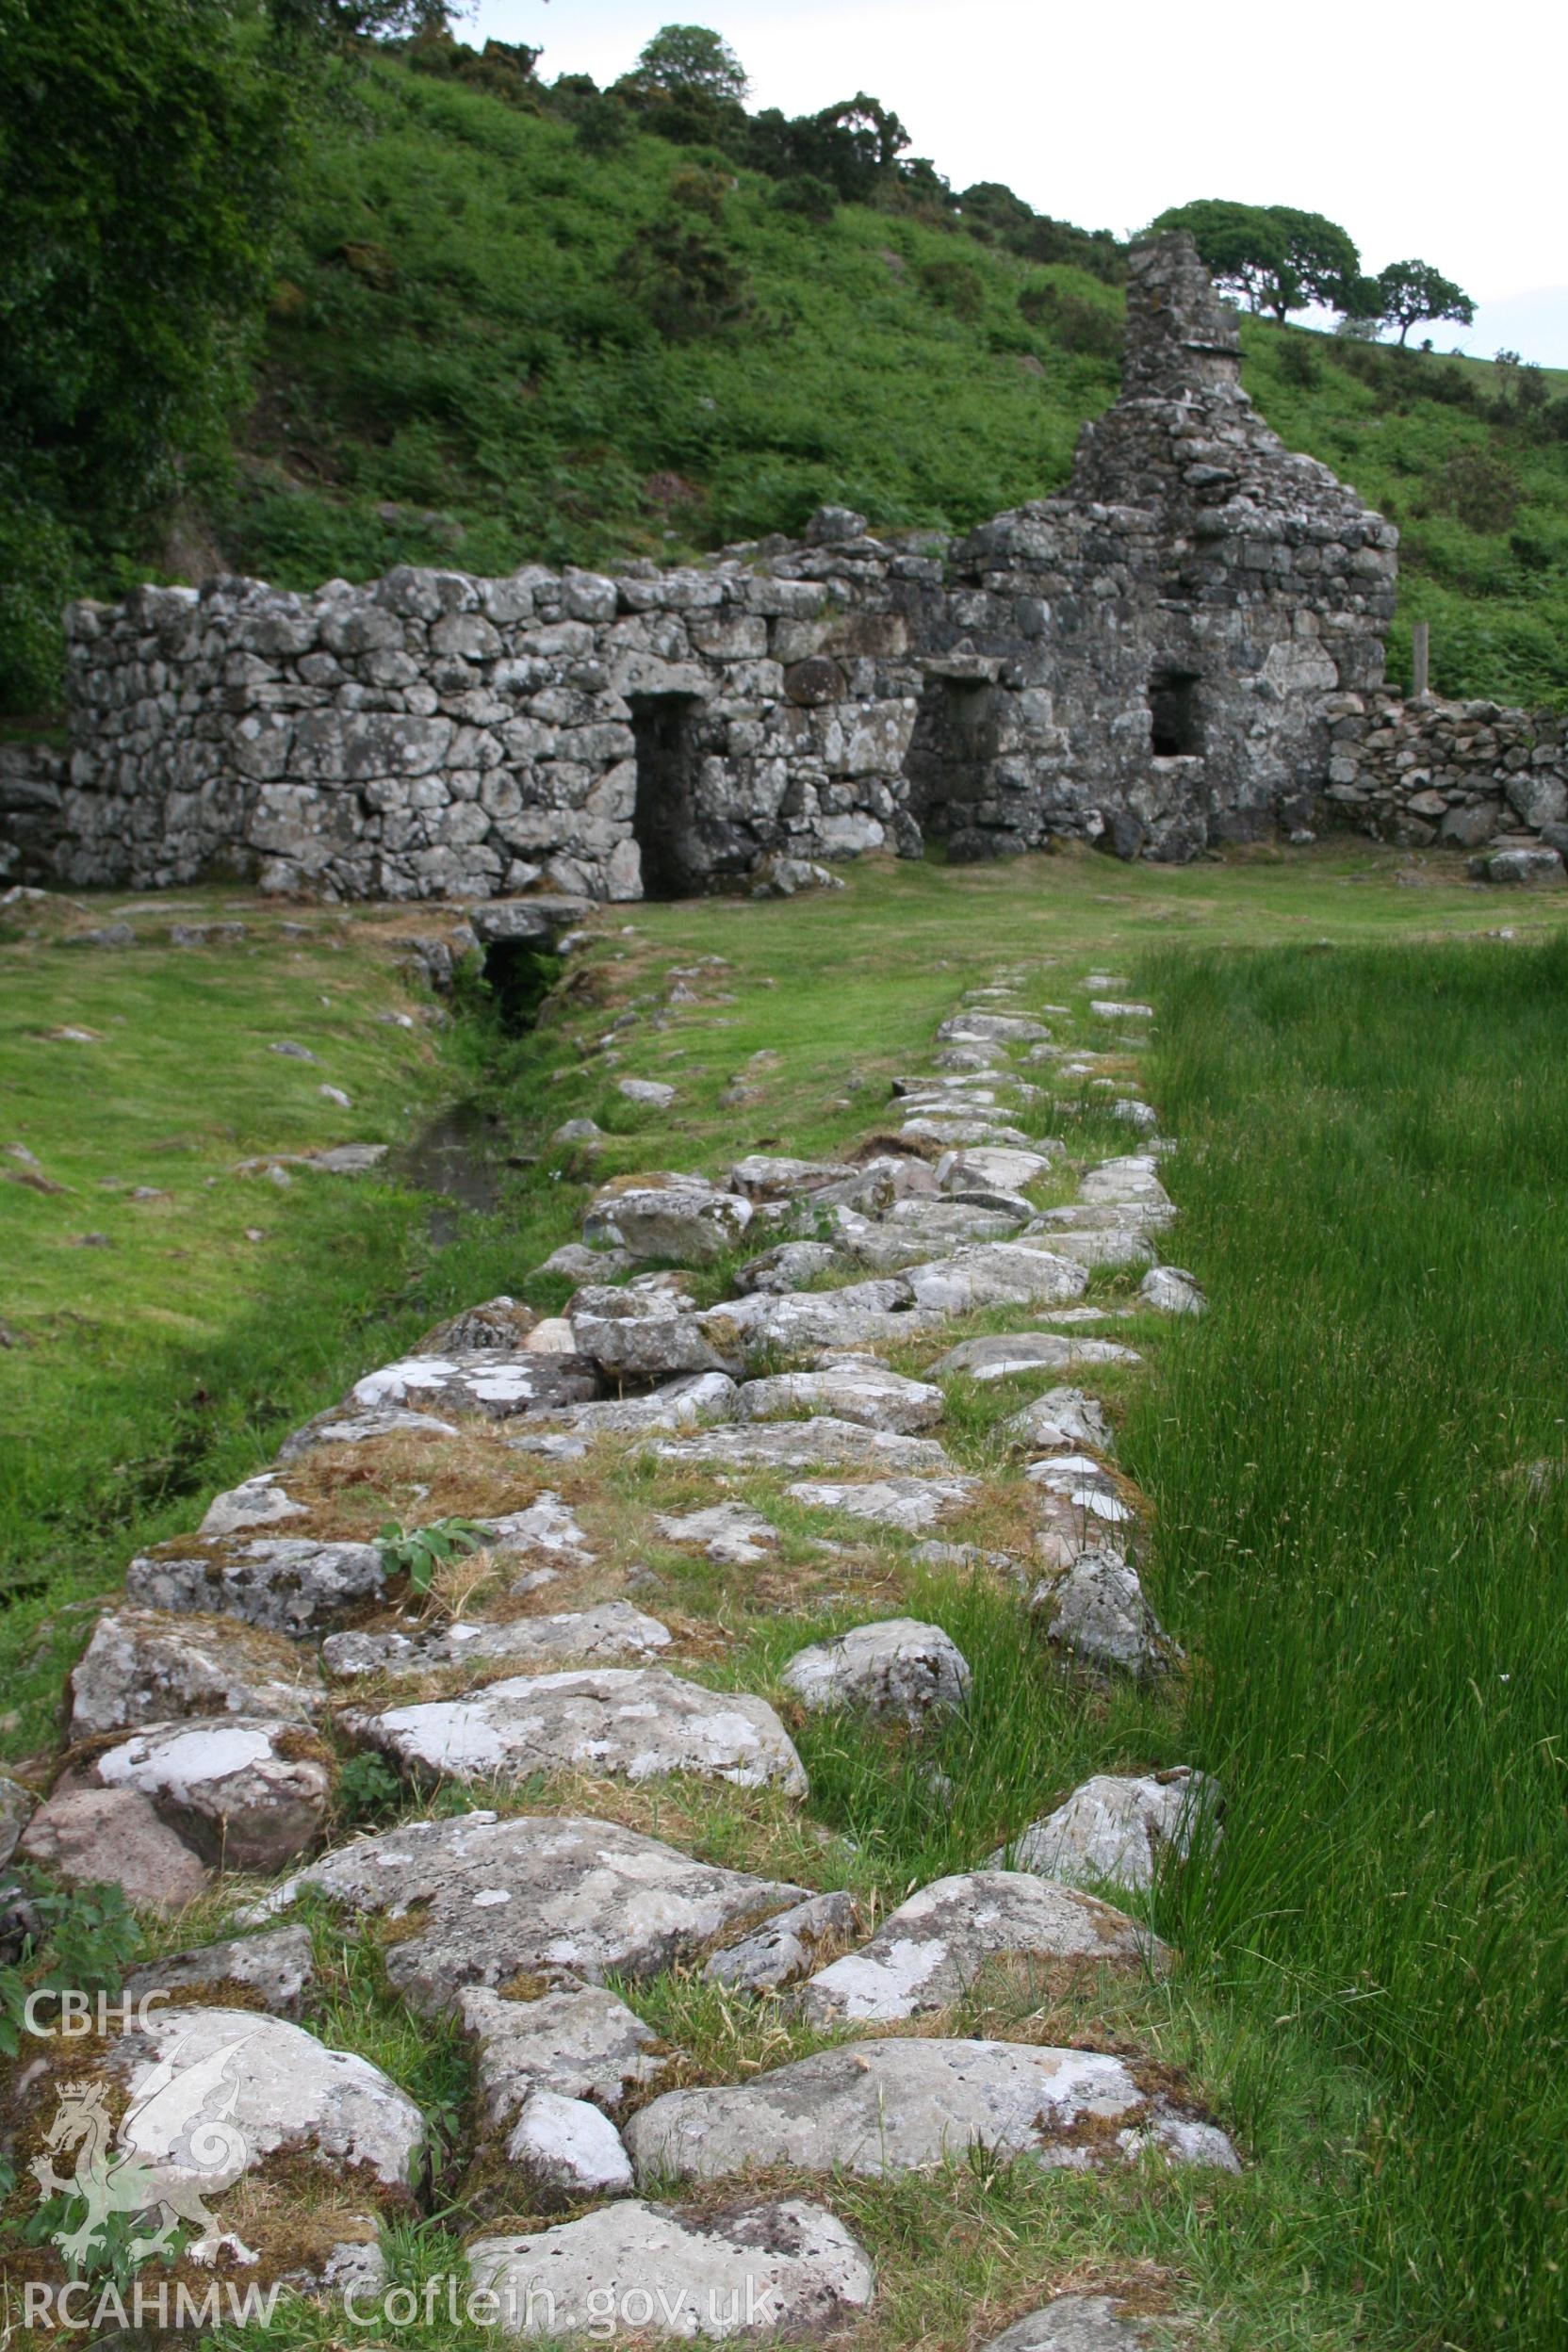 View towards well house and cottage along raised pathway that leads to latrine building.